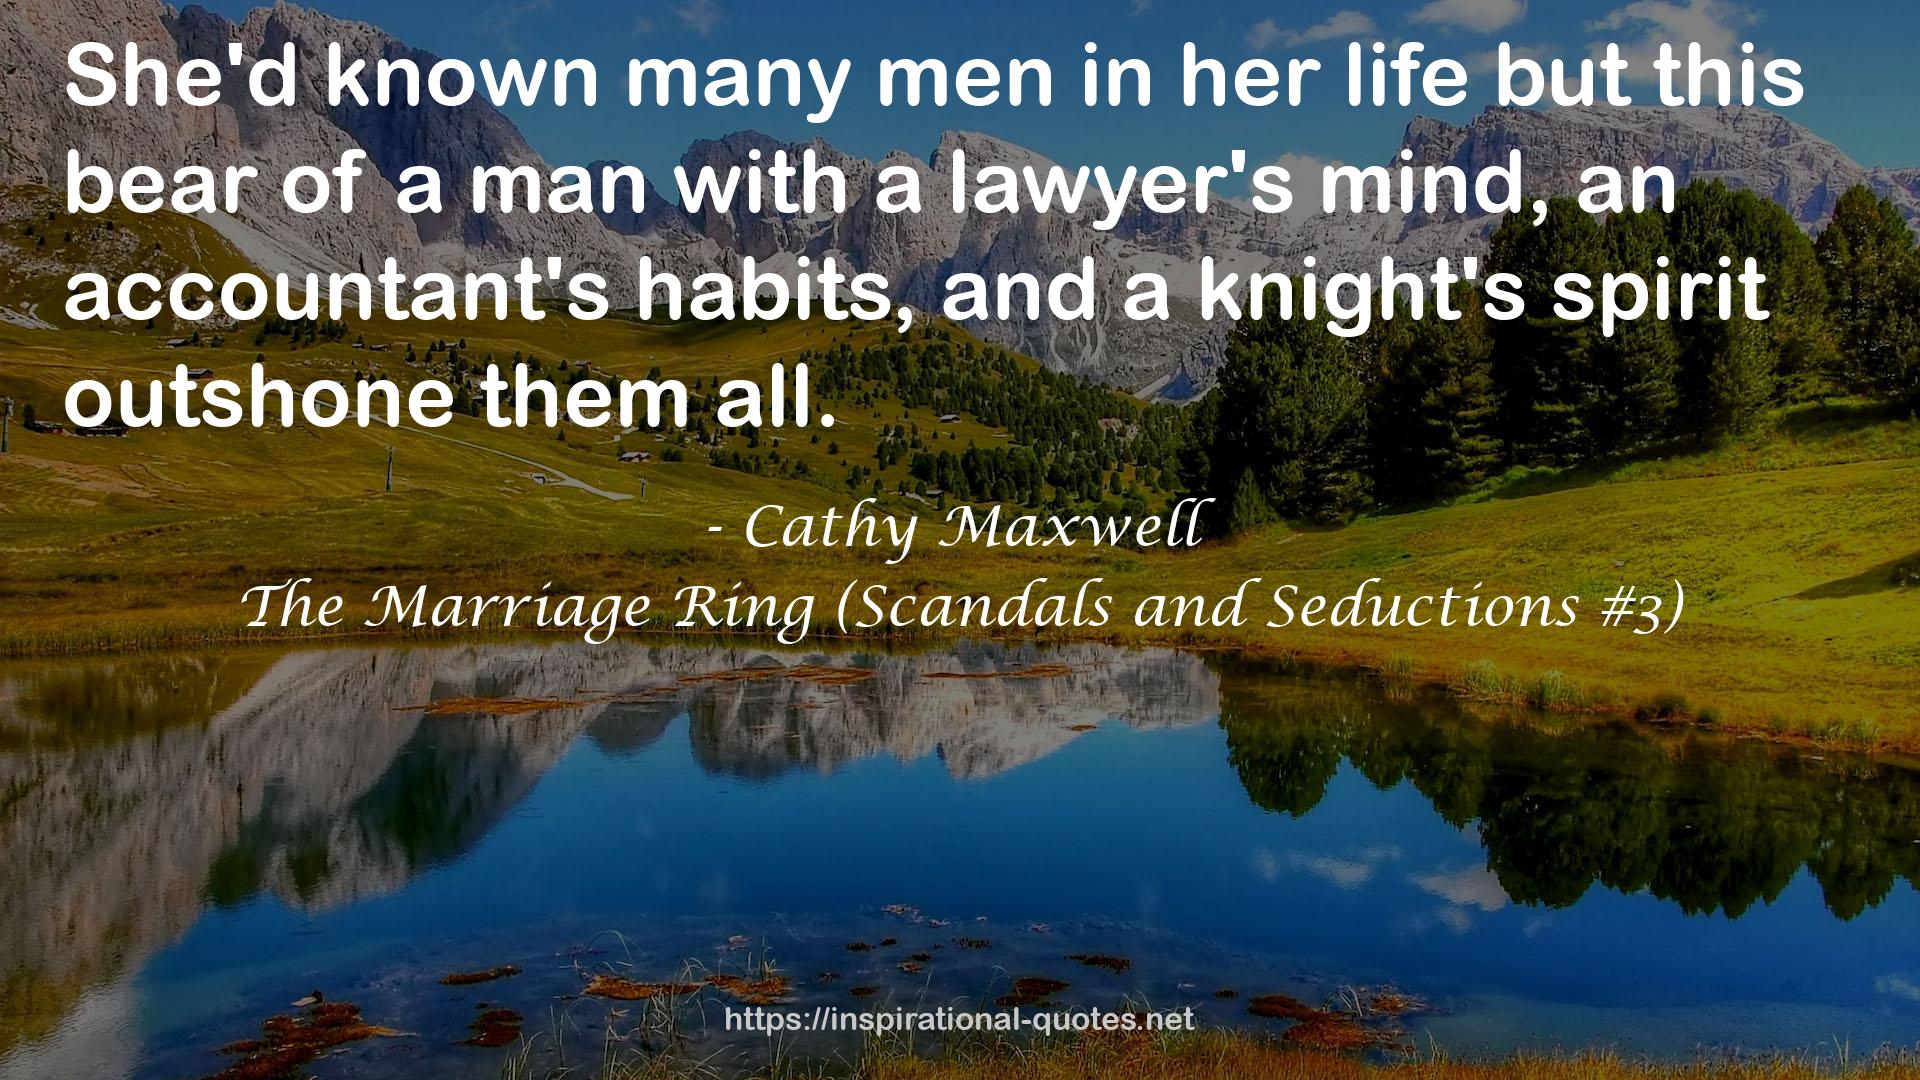 The Marriage Ring (Scandals and Seductions #3) QUOTES